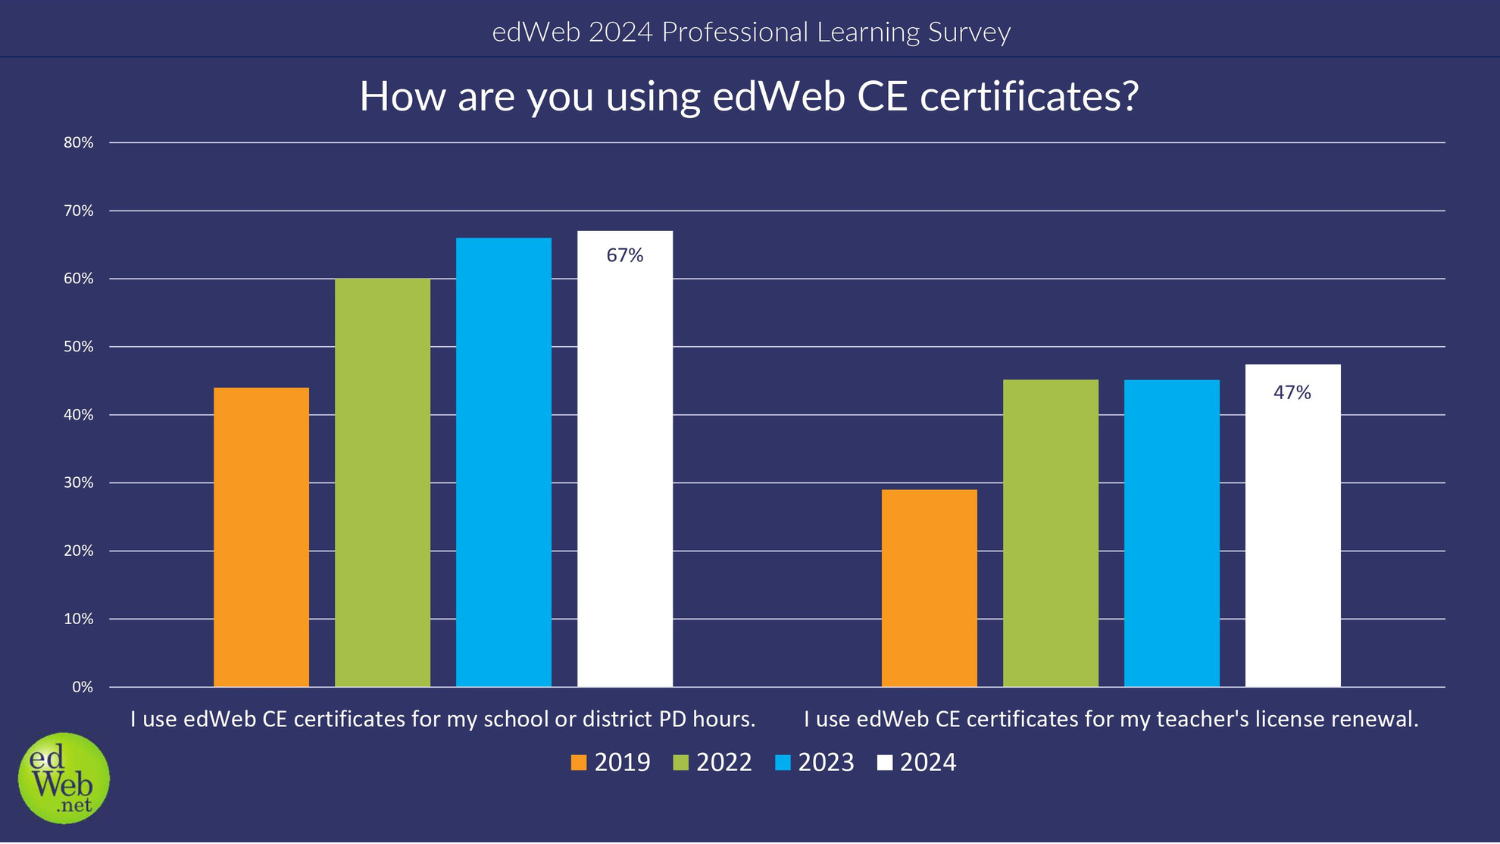 How are you using edWeb CE certificates?